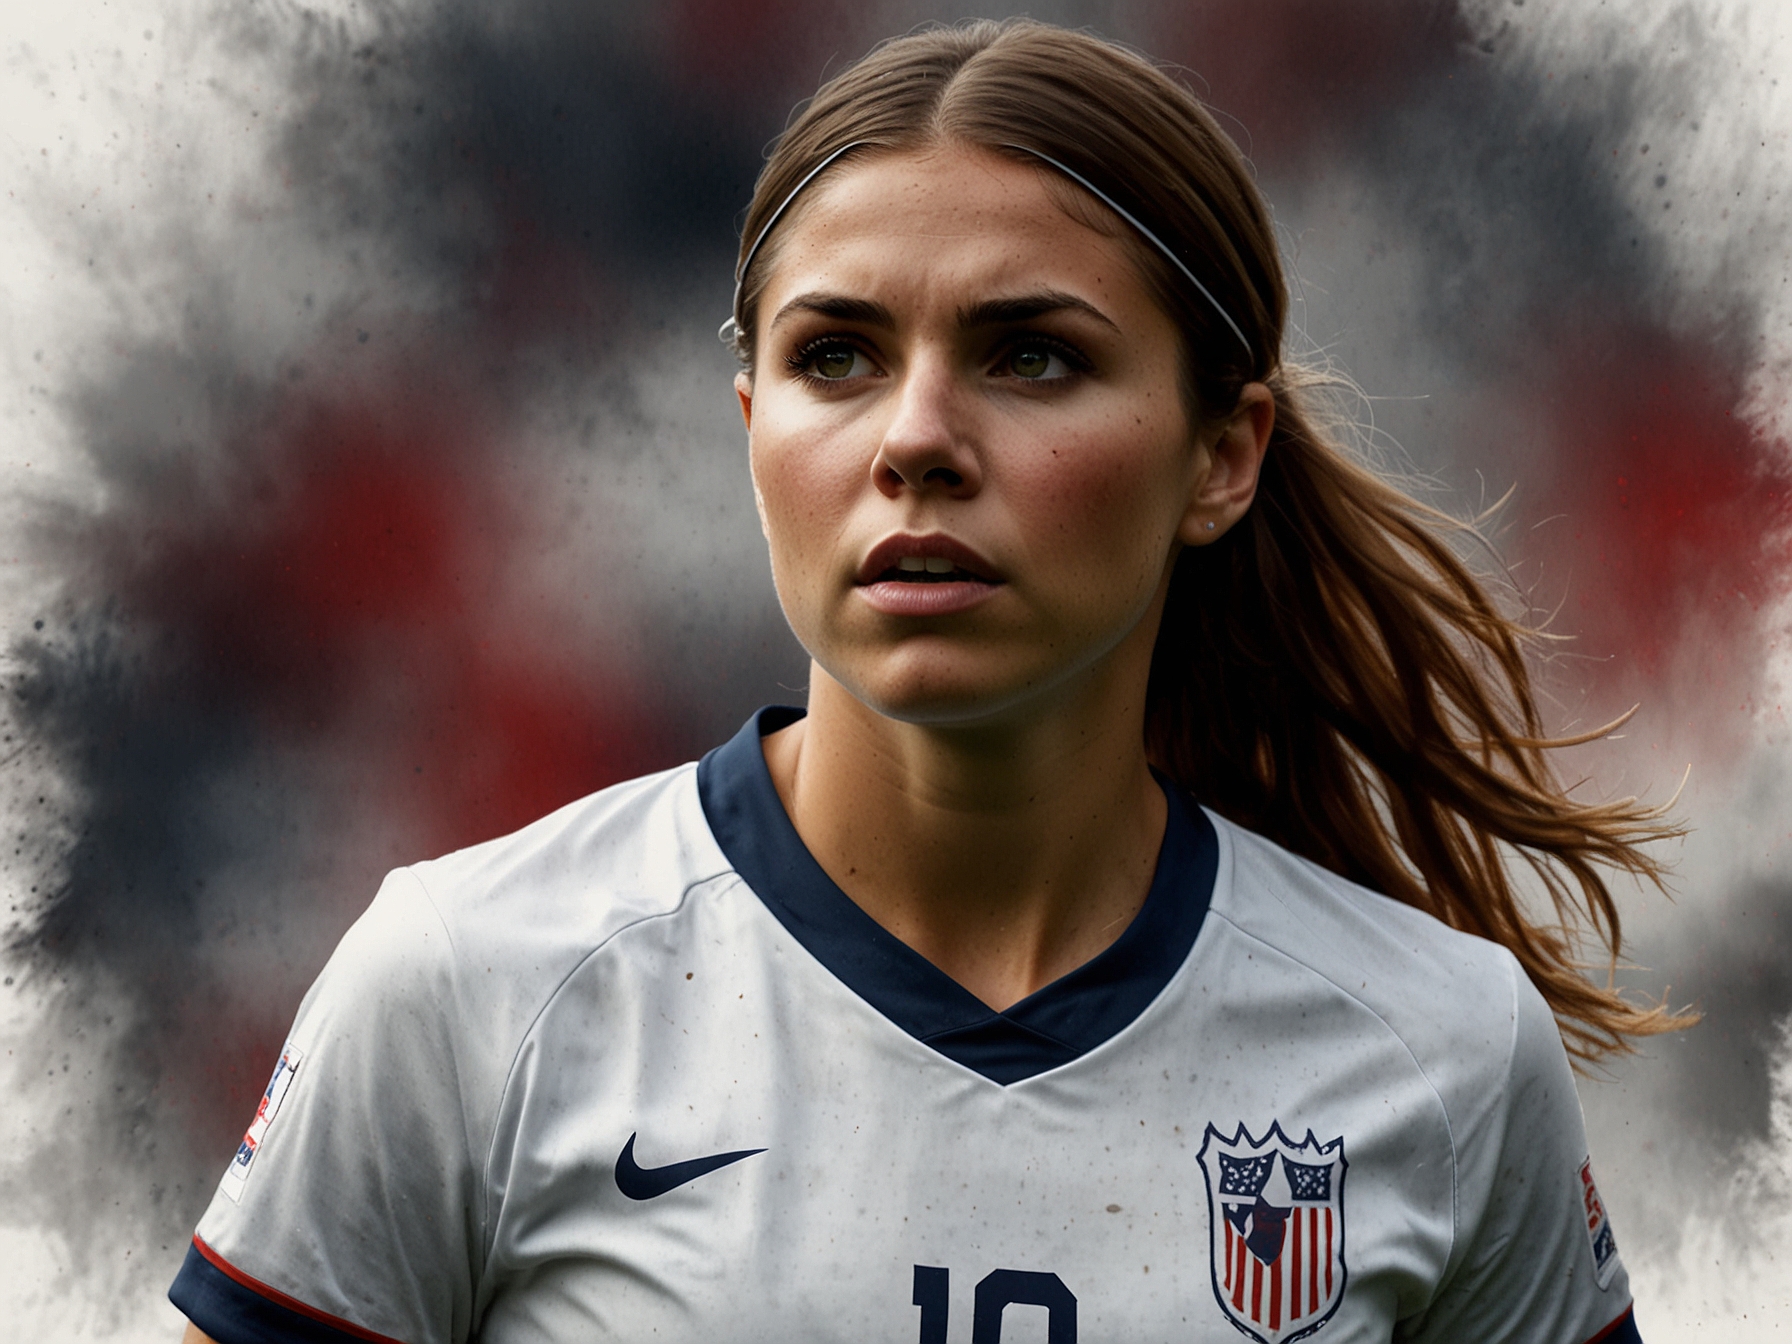 Alex Morgan, in her U.S. soccer kit during a past game, looking determined on the field. Her surprising omission from the Olympic roster has left fans and analysts questioning the team's future direction.